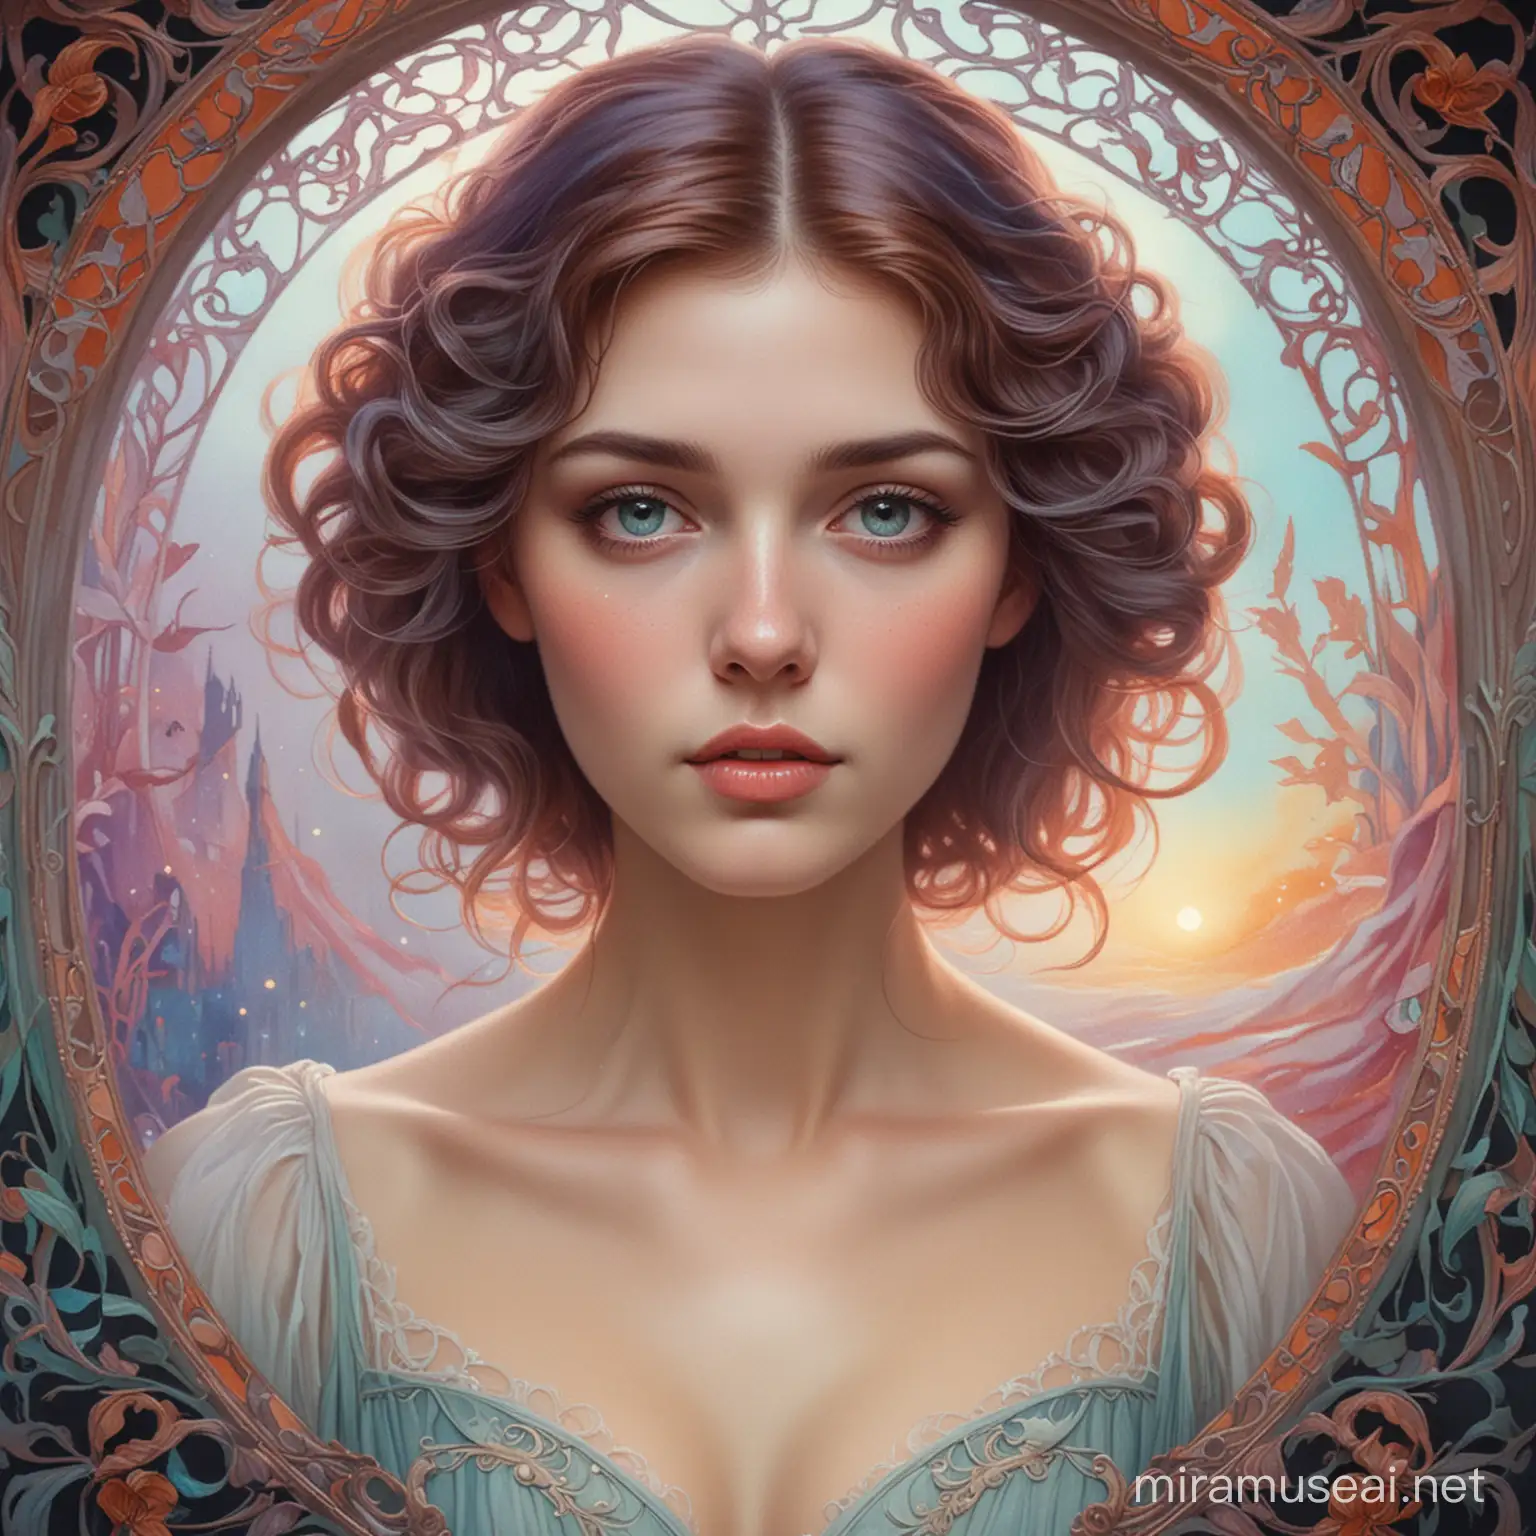 art nouveau style, beautiful woman with hazy eyes, ghostly, magical, colorful